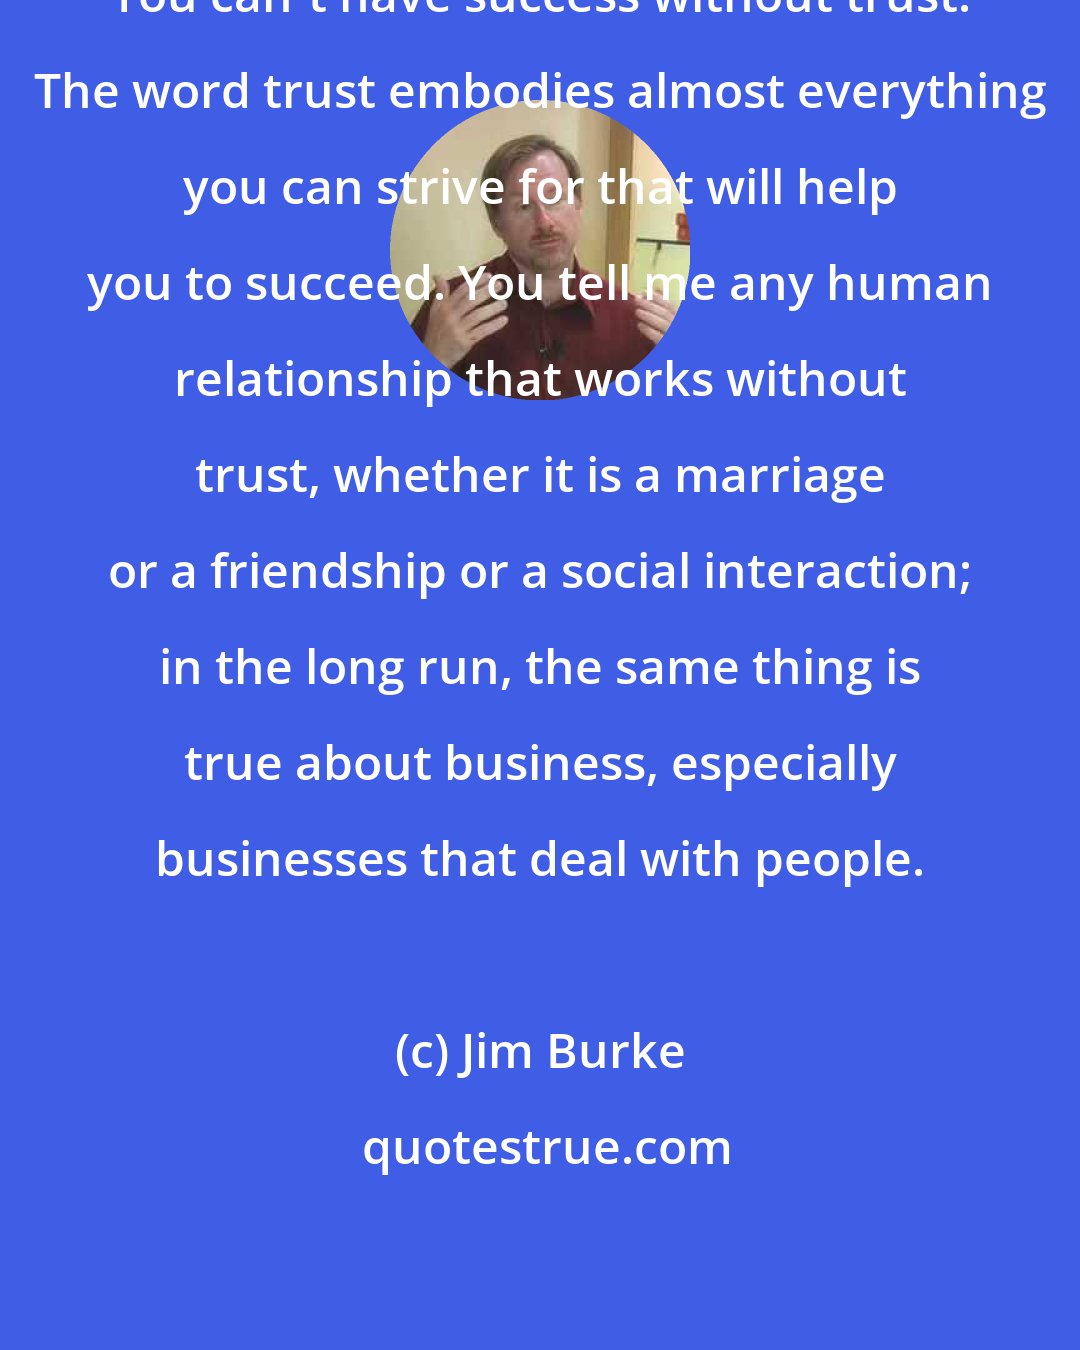 Jim Burke: You can't have success without trust. The word trust embodies almost everything you can strive for that will help you to succeed. You tell me any human relationship that works without trust, whether it is a marriage or a friendship or a social interaction; in the long run, the same thing is true about business, especially businesses that deal with people.